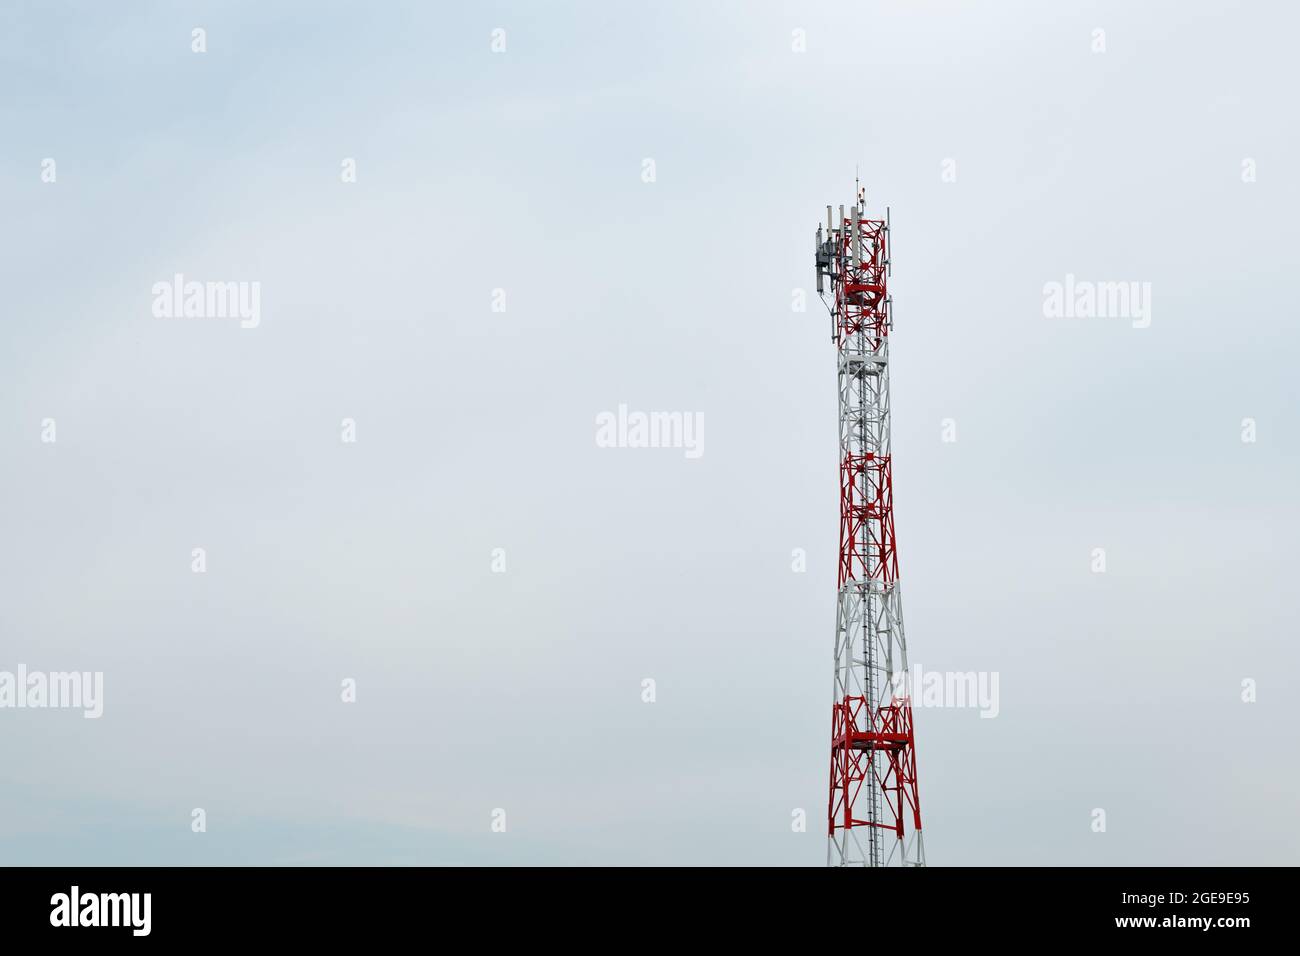 Telecommunication tower with antennas and signal repeaters against overcast sky as copy space Stock Photo